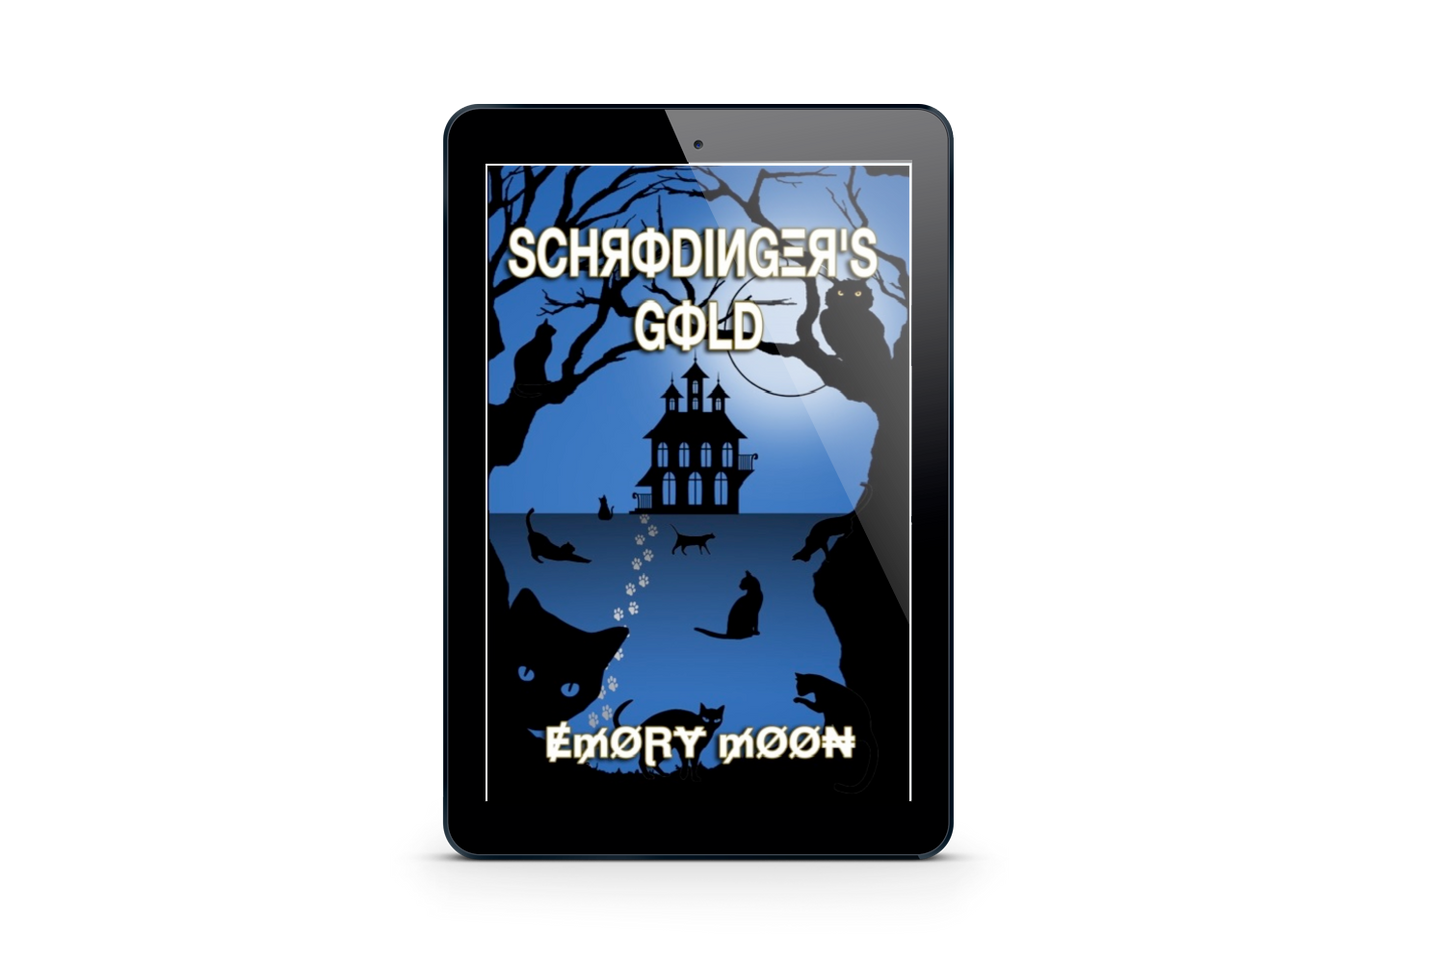 BONUS - Your FREE copy of Schrodinger's Gold - (ebook instant download) (209 page New Orleans murder mystery) FREE after BUNDLE498 discount